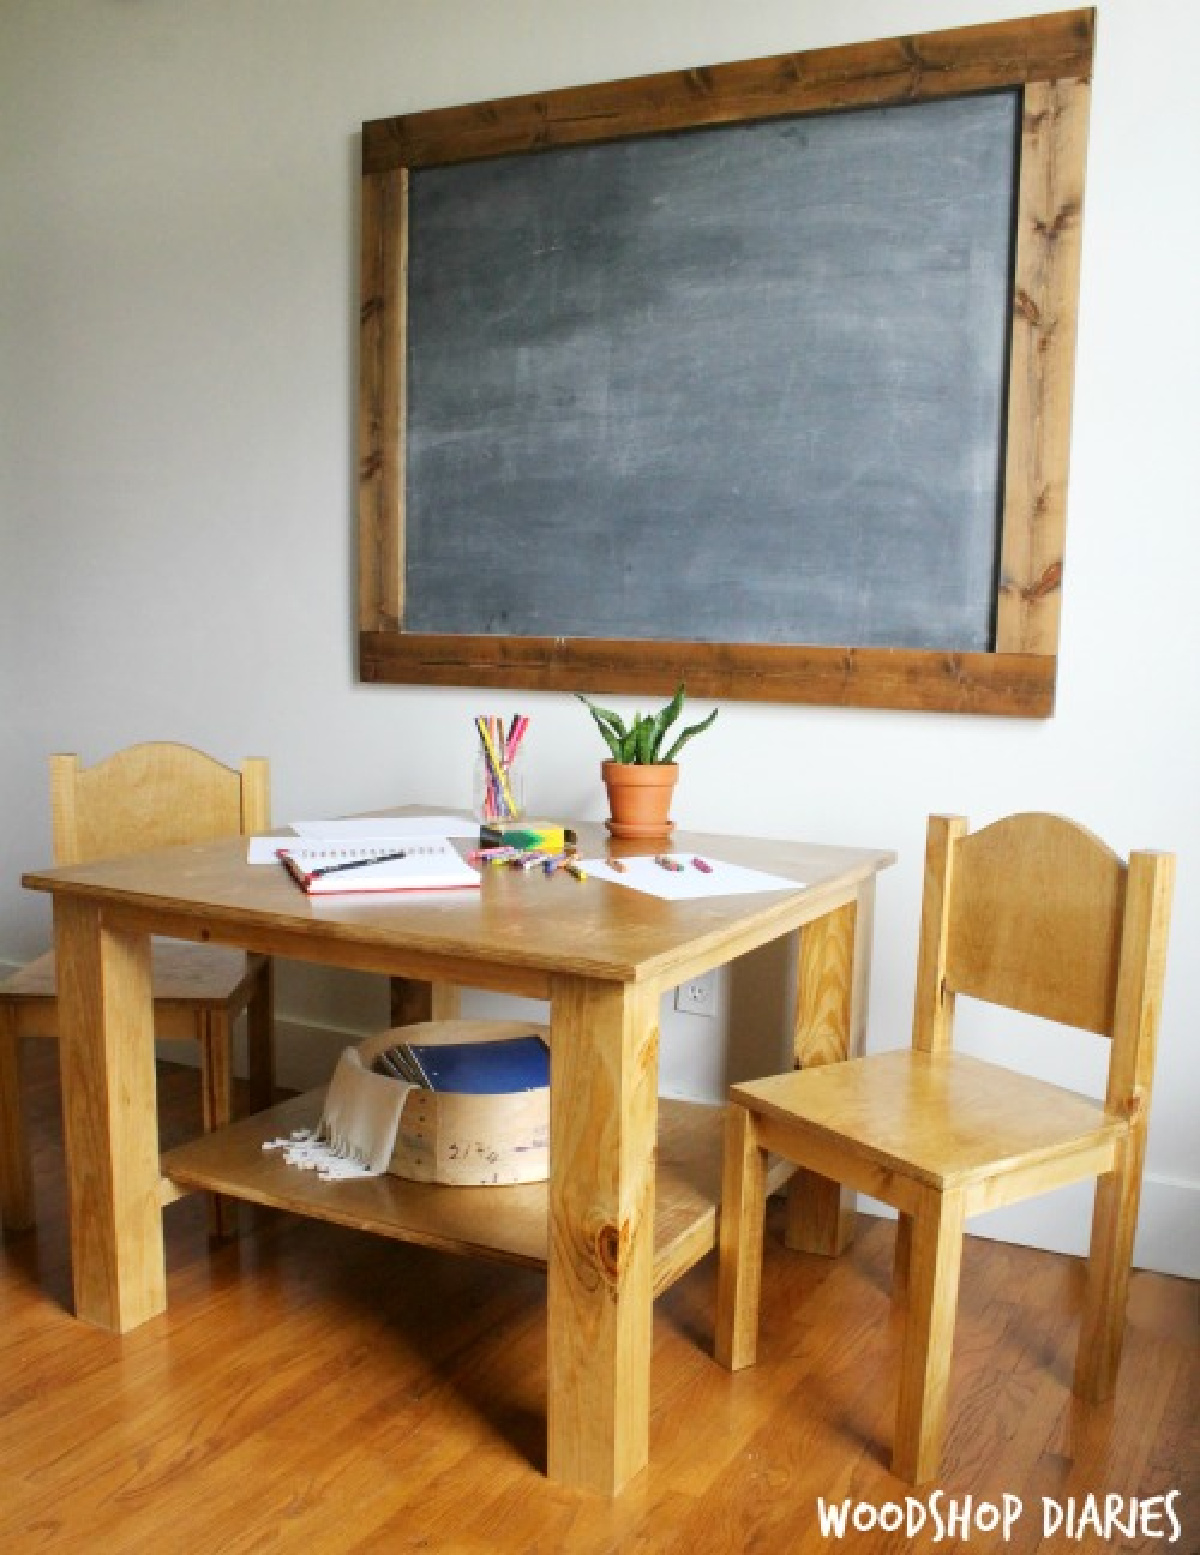 Wooden kids table with two chairs play set with chalkboard on wall